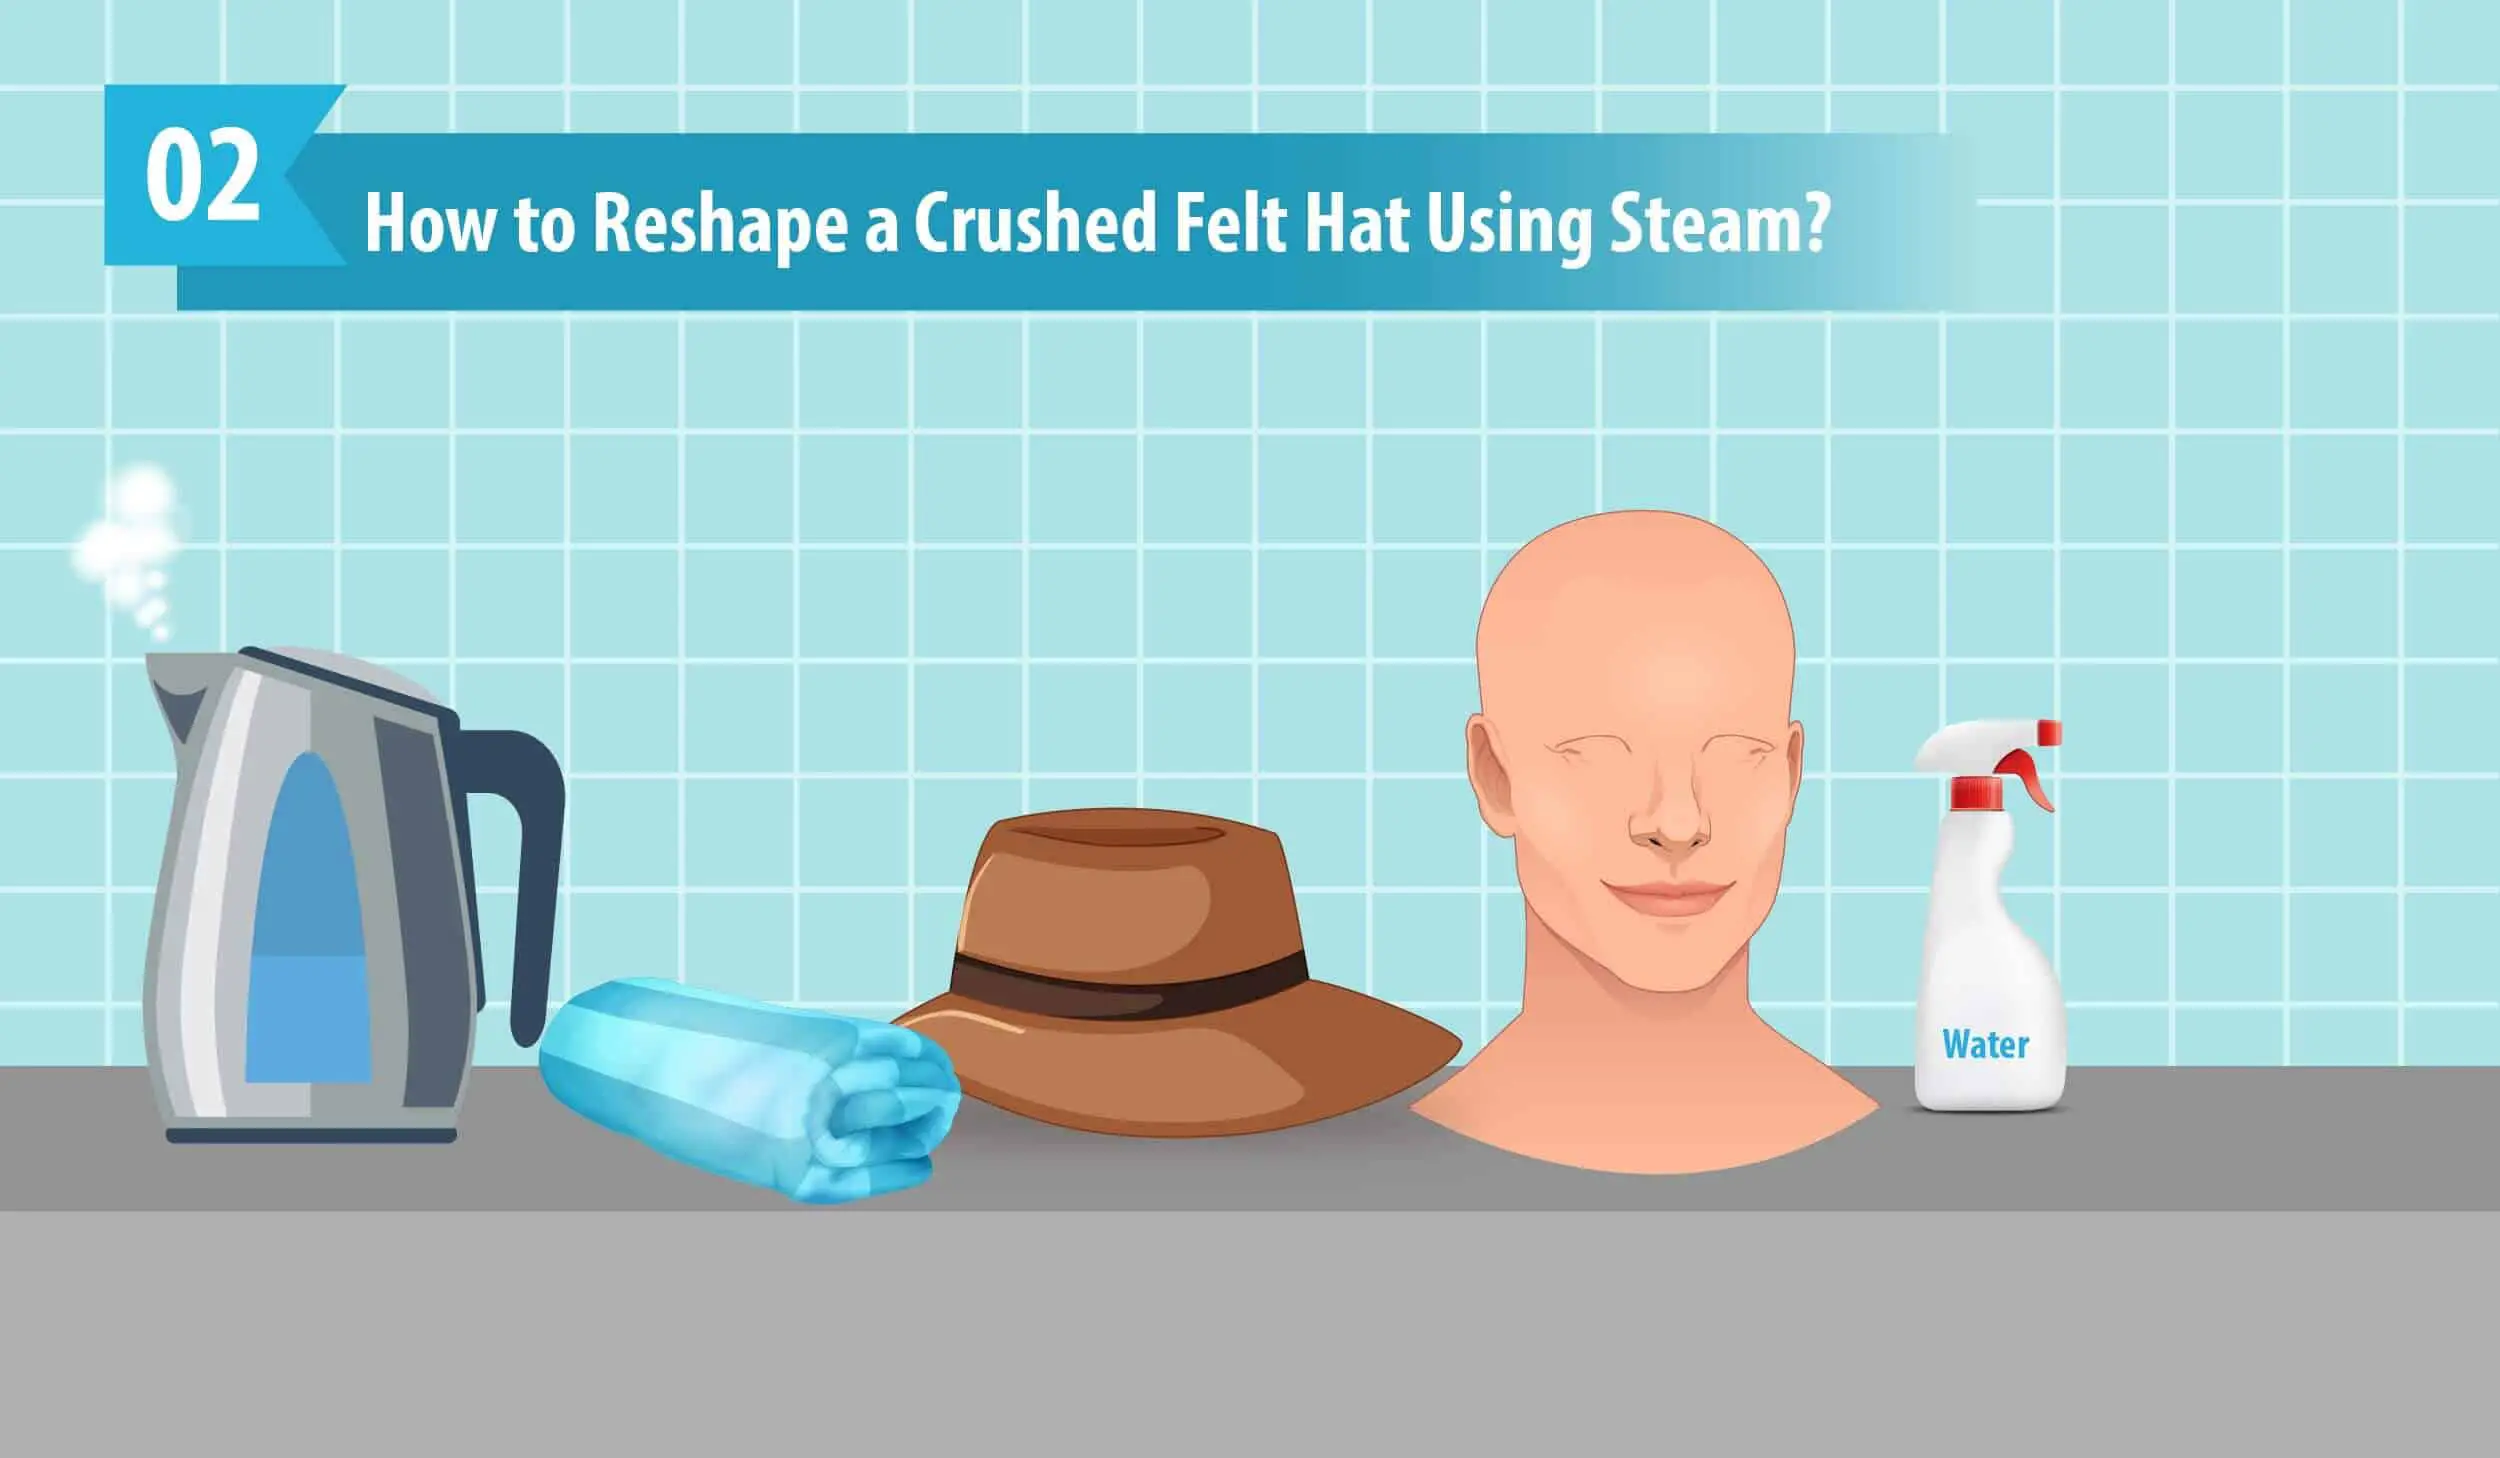 How to Reshape a Crushed Felt Hat Using Steam